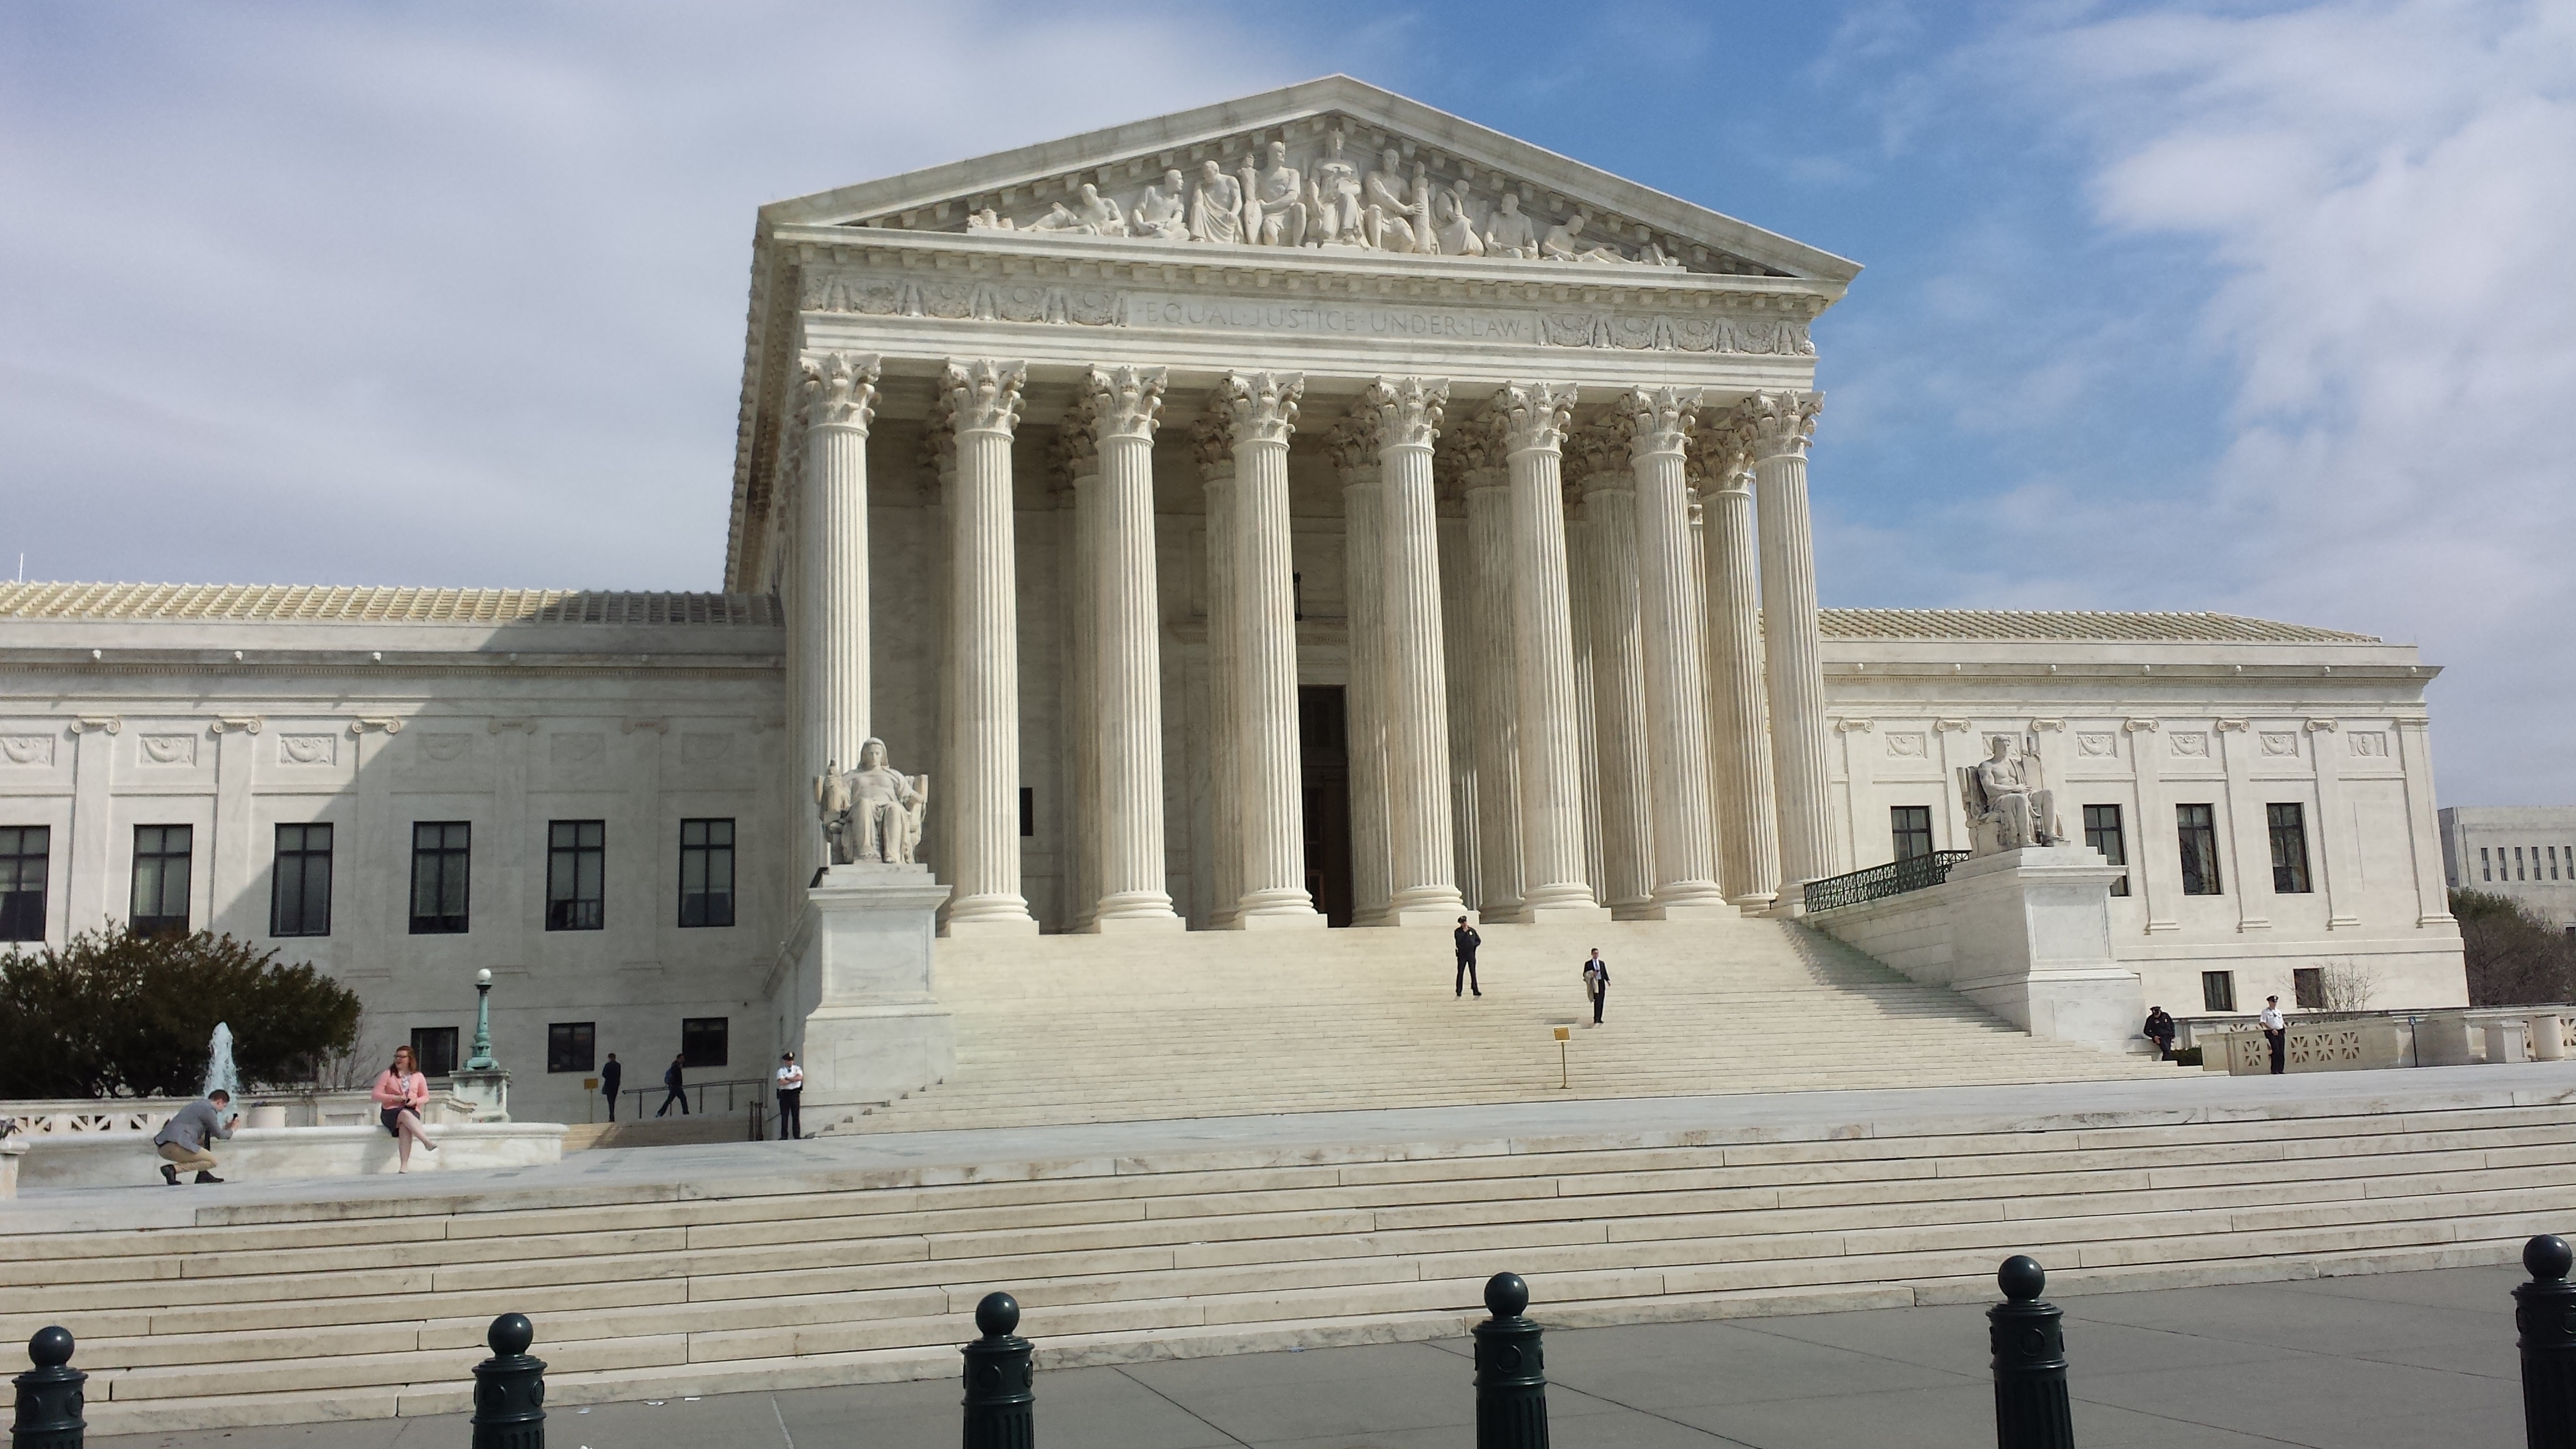 News Release- US Supreme Court Acts Like Lawmakers, Not Judges